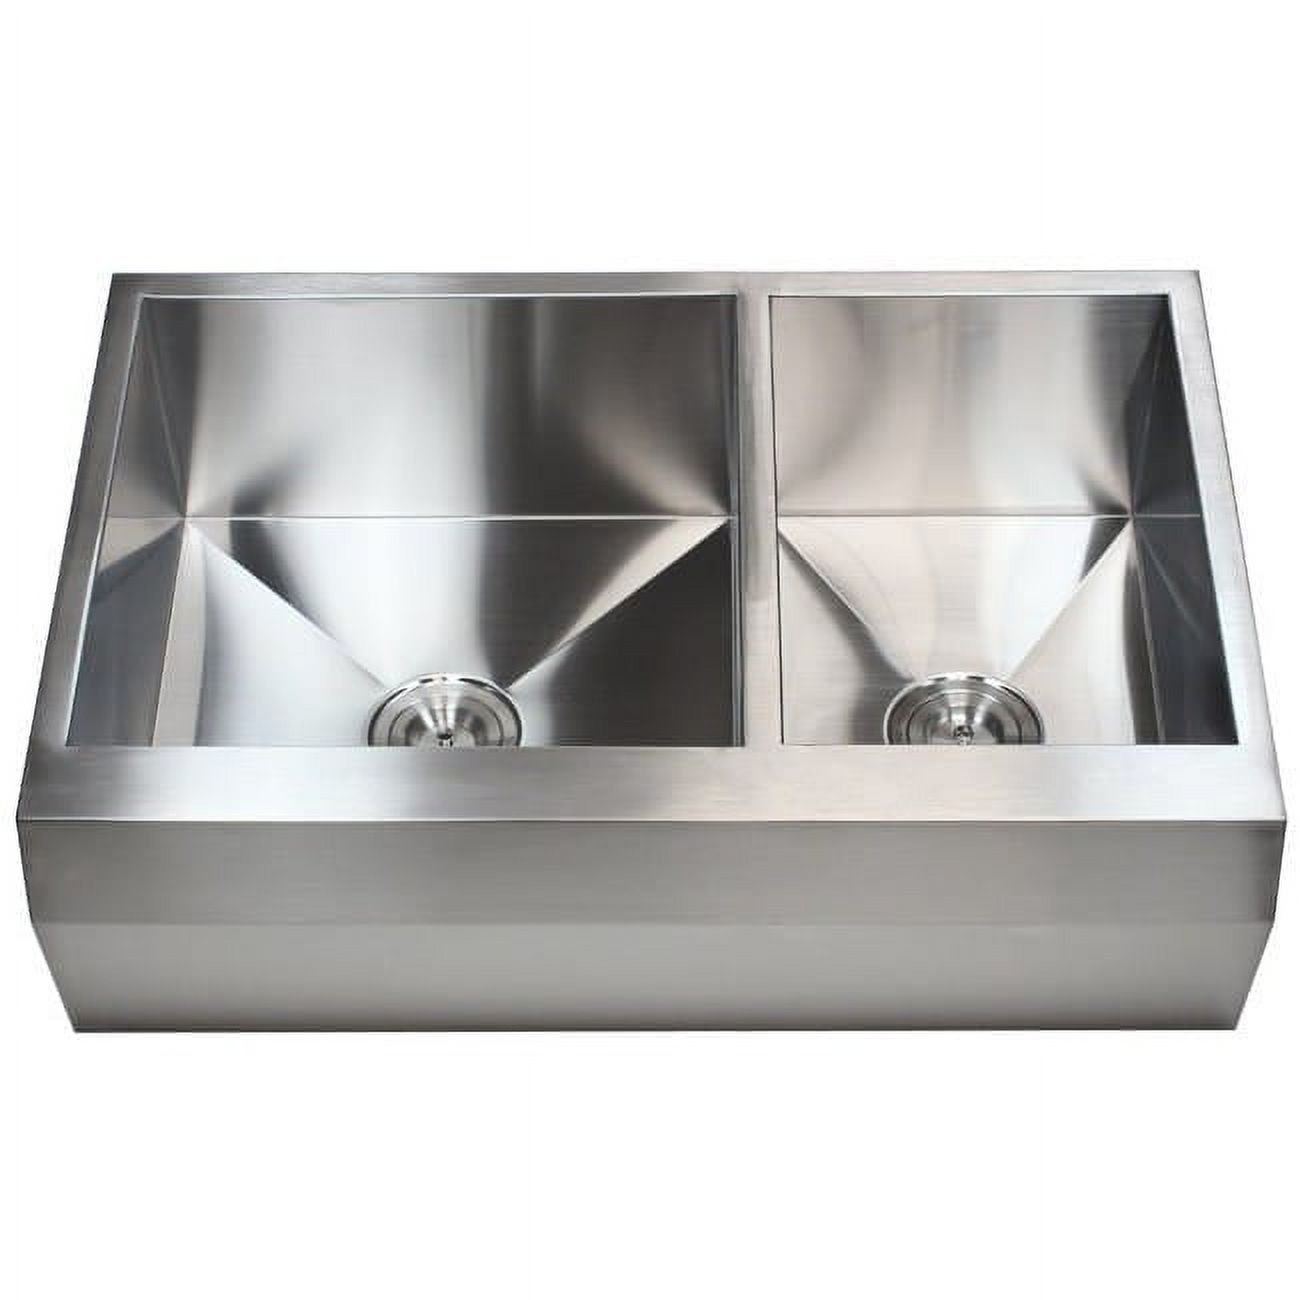 Contempo Living  33 in. Double Bowl 60 by 40 Zero Radius Well Angled Farm Apron Kitchen Sink - Stainless Steel - 16 Gauge - image 1 of 5